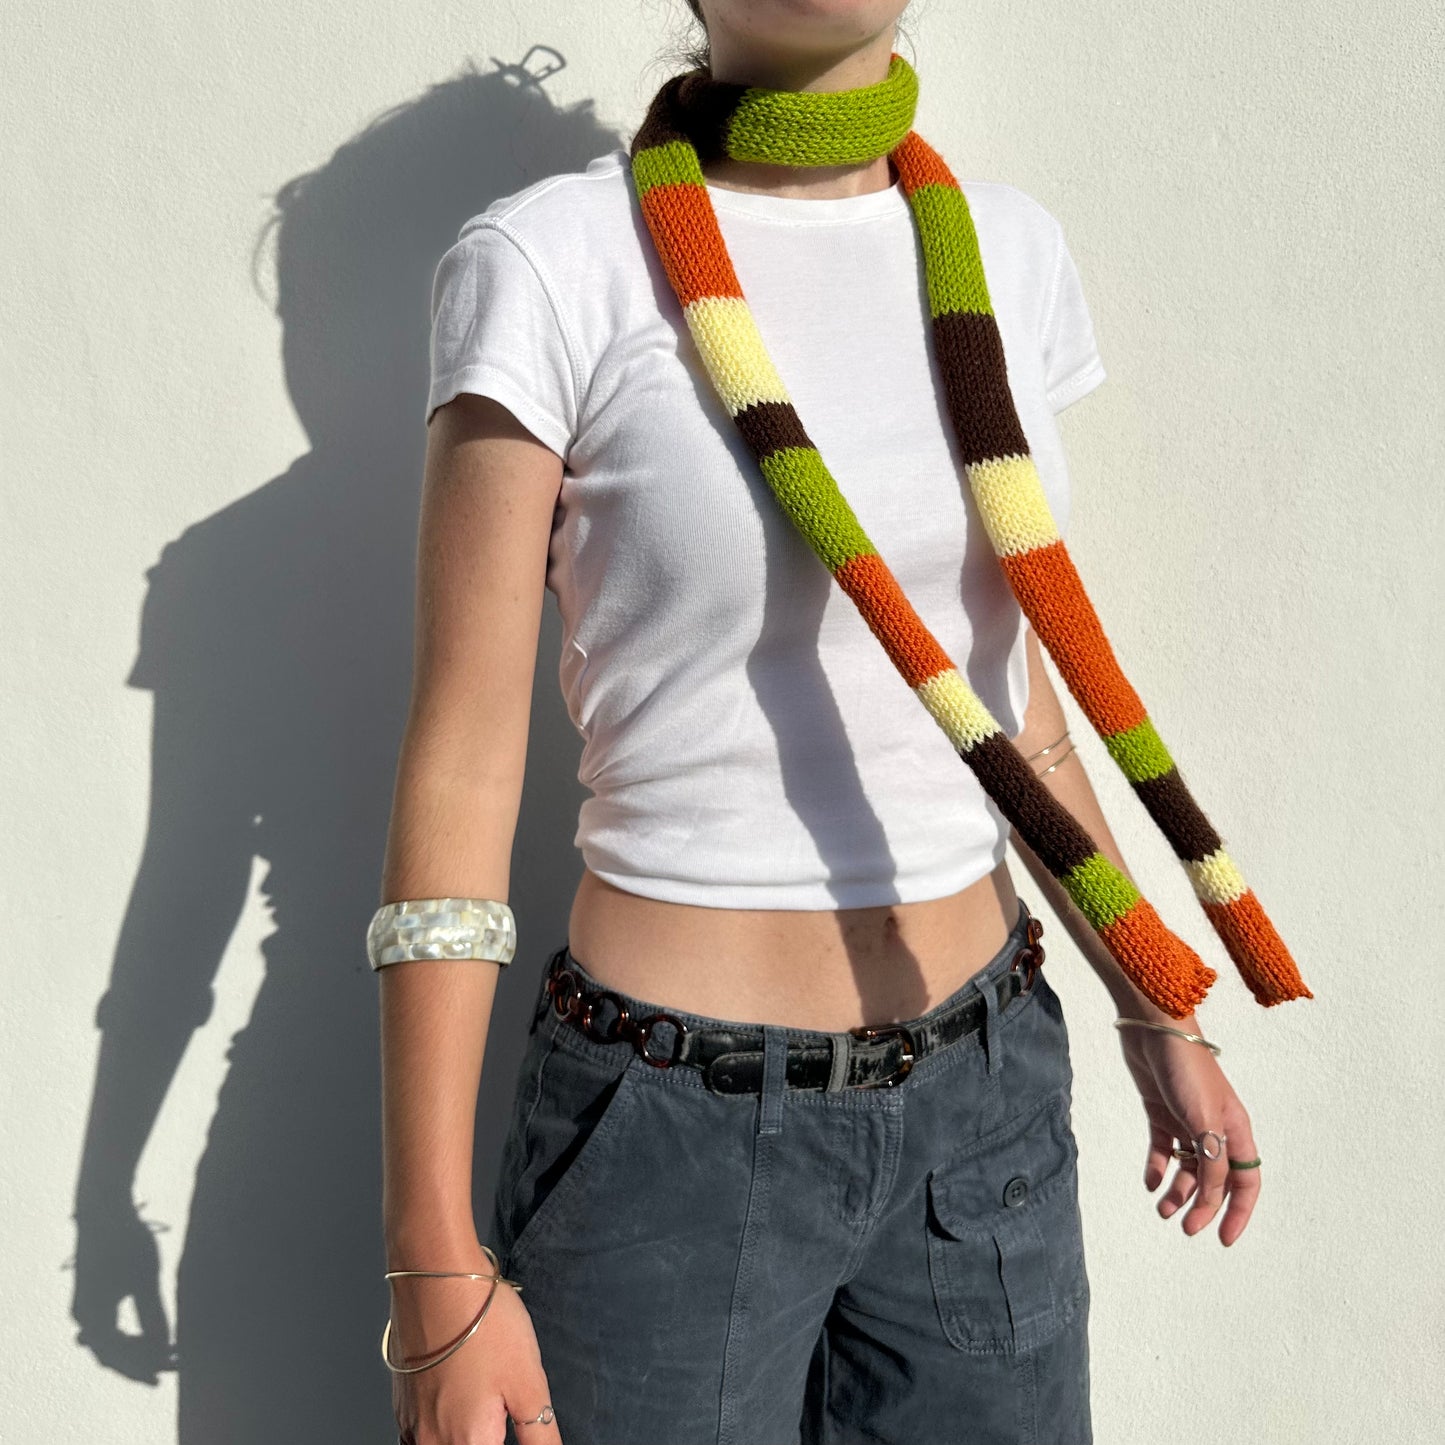 Handmade knitted stripy skinny scarf in orange, brown green and yellow